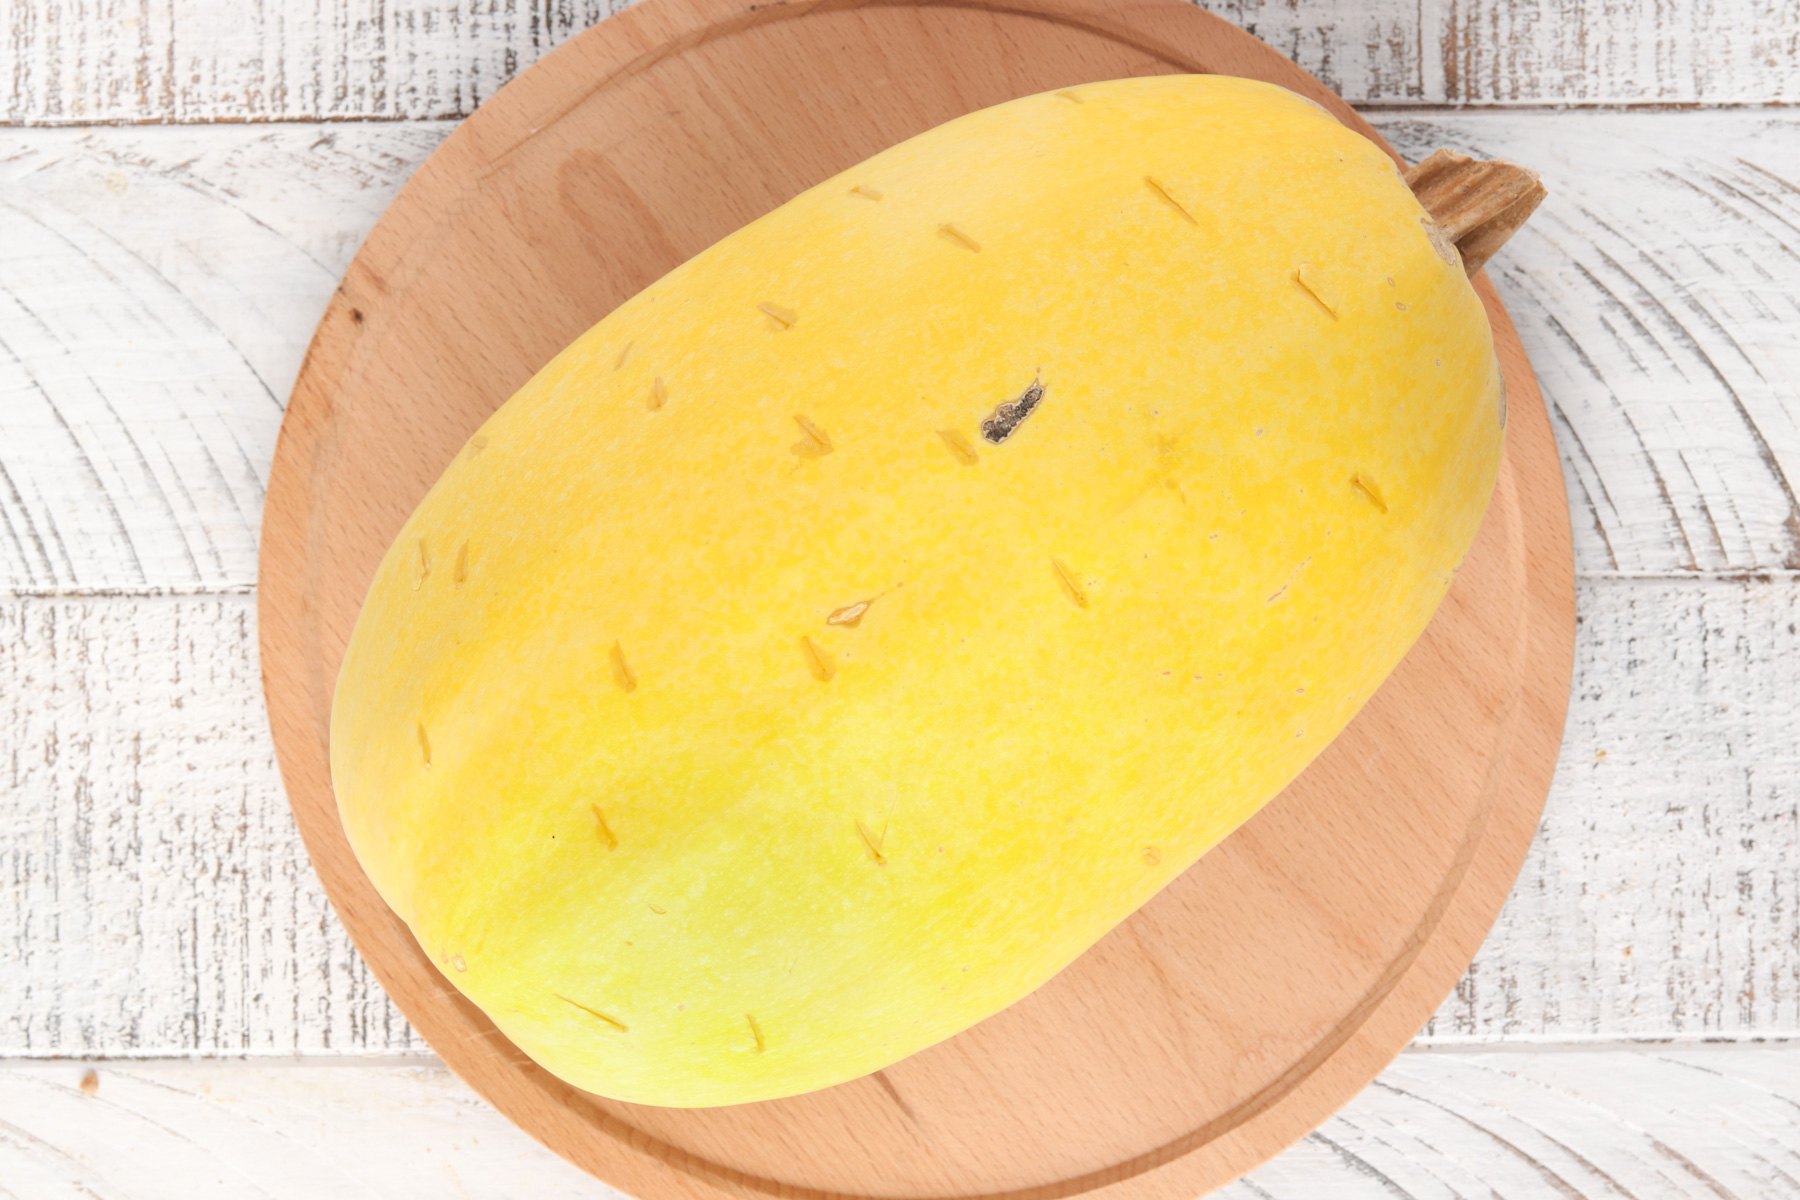 Whole spaghetti squash that has been poked with holes on a wood cutting board.